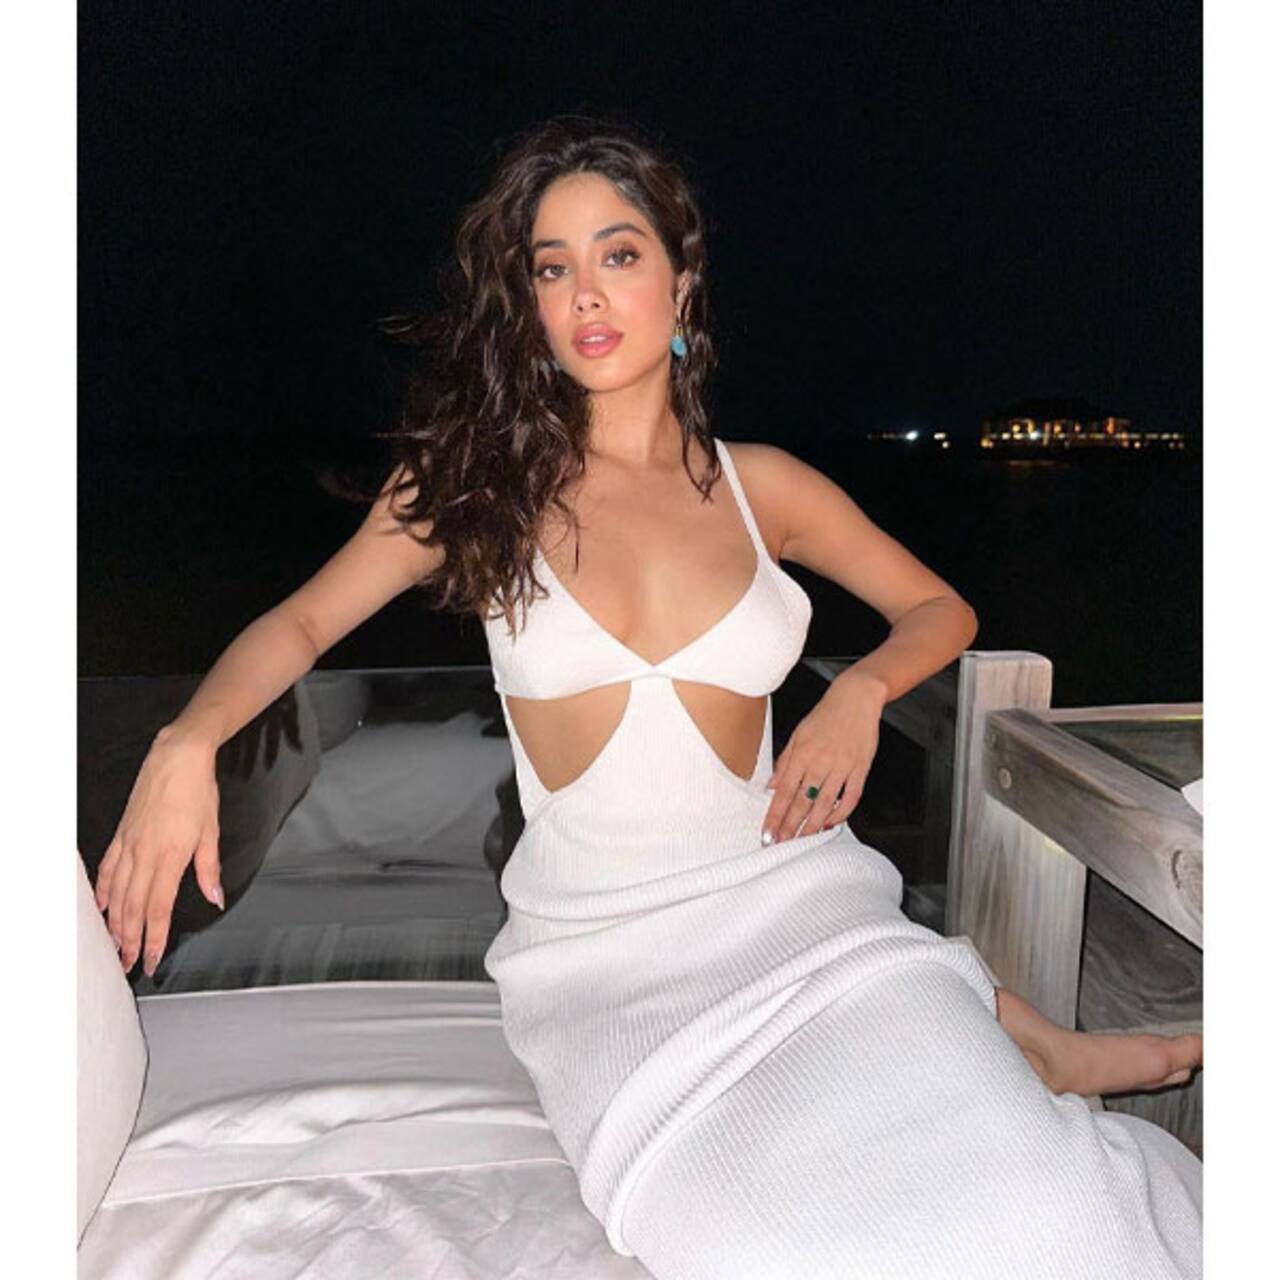 Janhvi Kapoor is a vision in white in this picture.